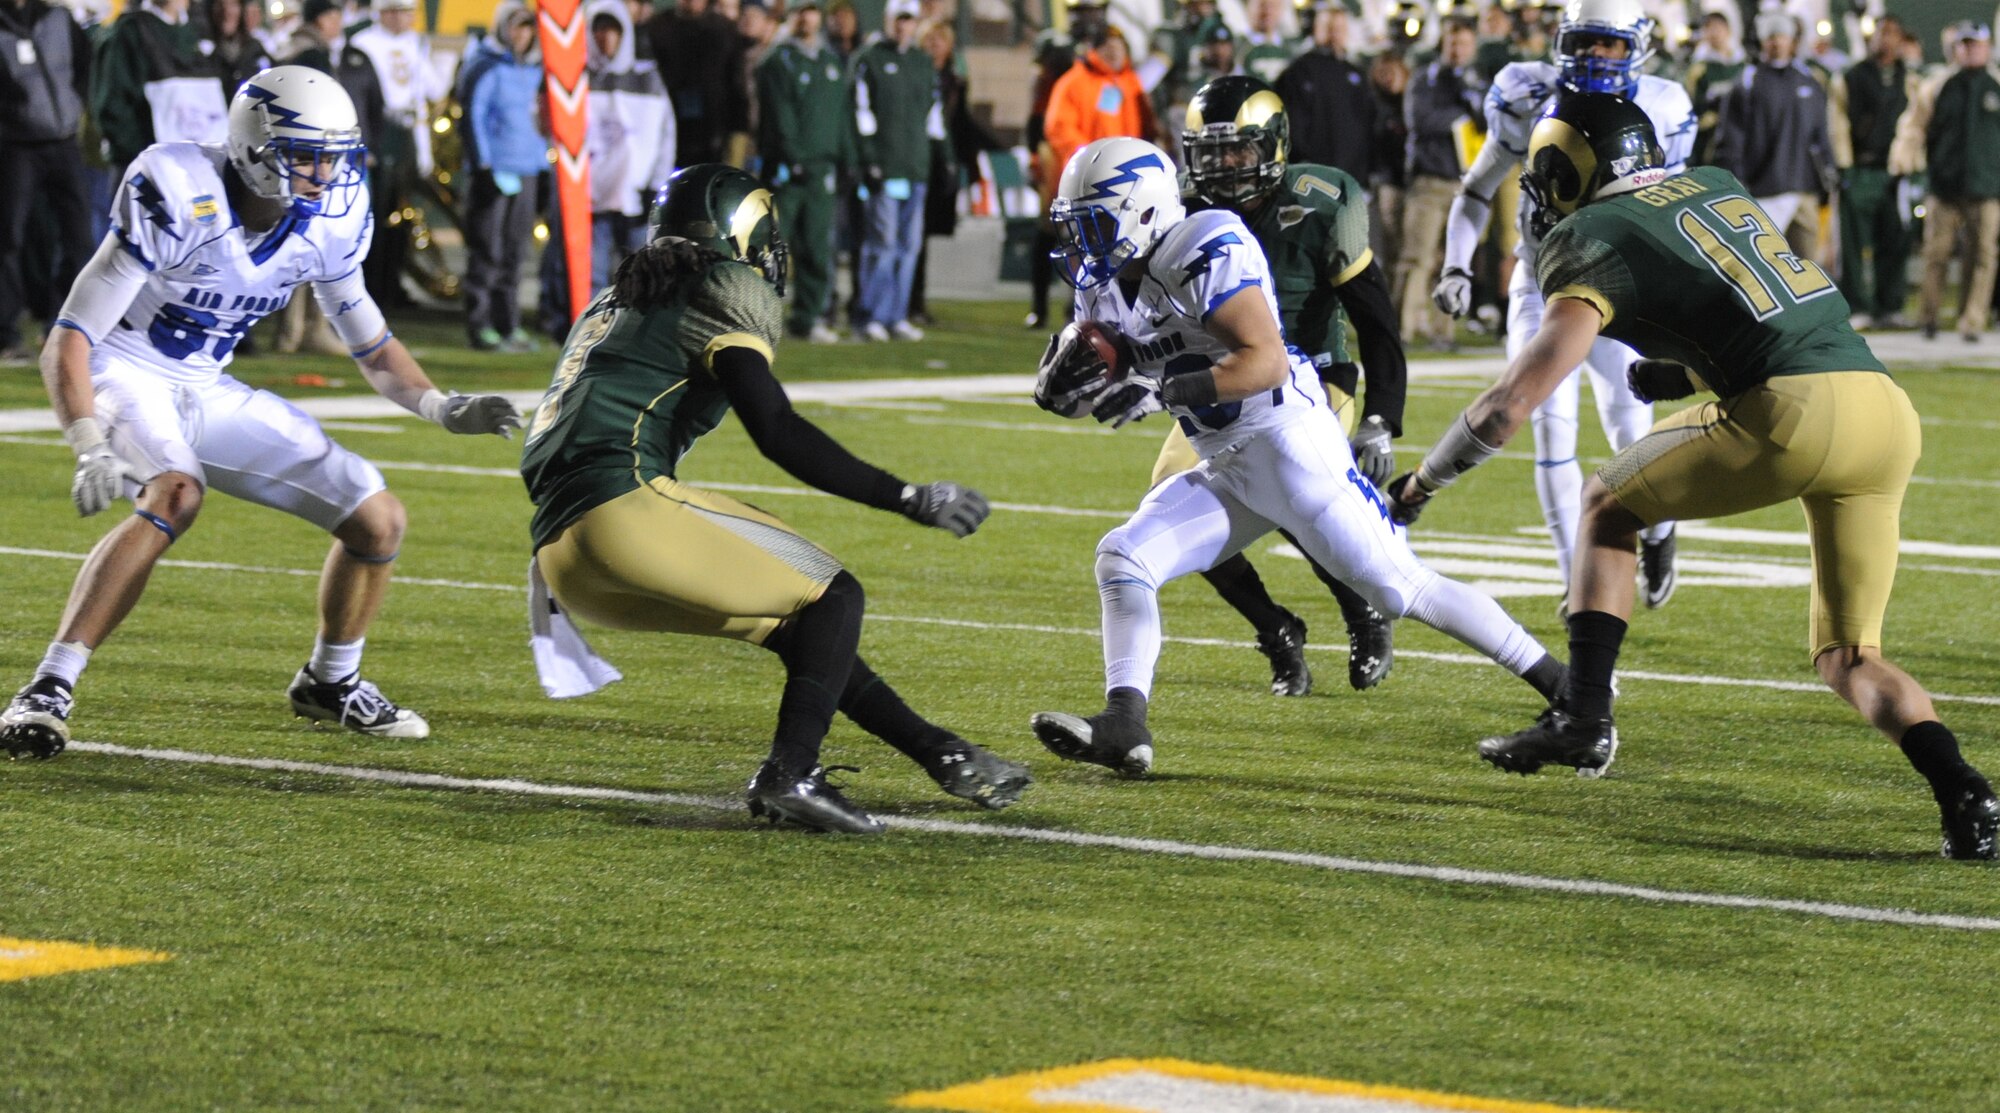 Air Force wide receiver Cody Getz, center, dodges Colorado State defenders en route to his first touchdown of the season during the Falcons' 45-21 victory over the Rams Nov. 26, 2011. Regional rivalries like Air Force-CSU were one of the factors in Air Force's decision to stay in the Mountain West Conference, Academy Superintendent Lt. Gen. Mike Gould said Dec. 7. (U.S. Air Force photo/John Van Winkle)